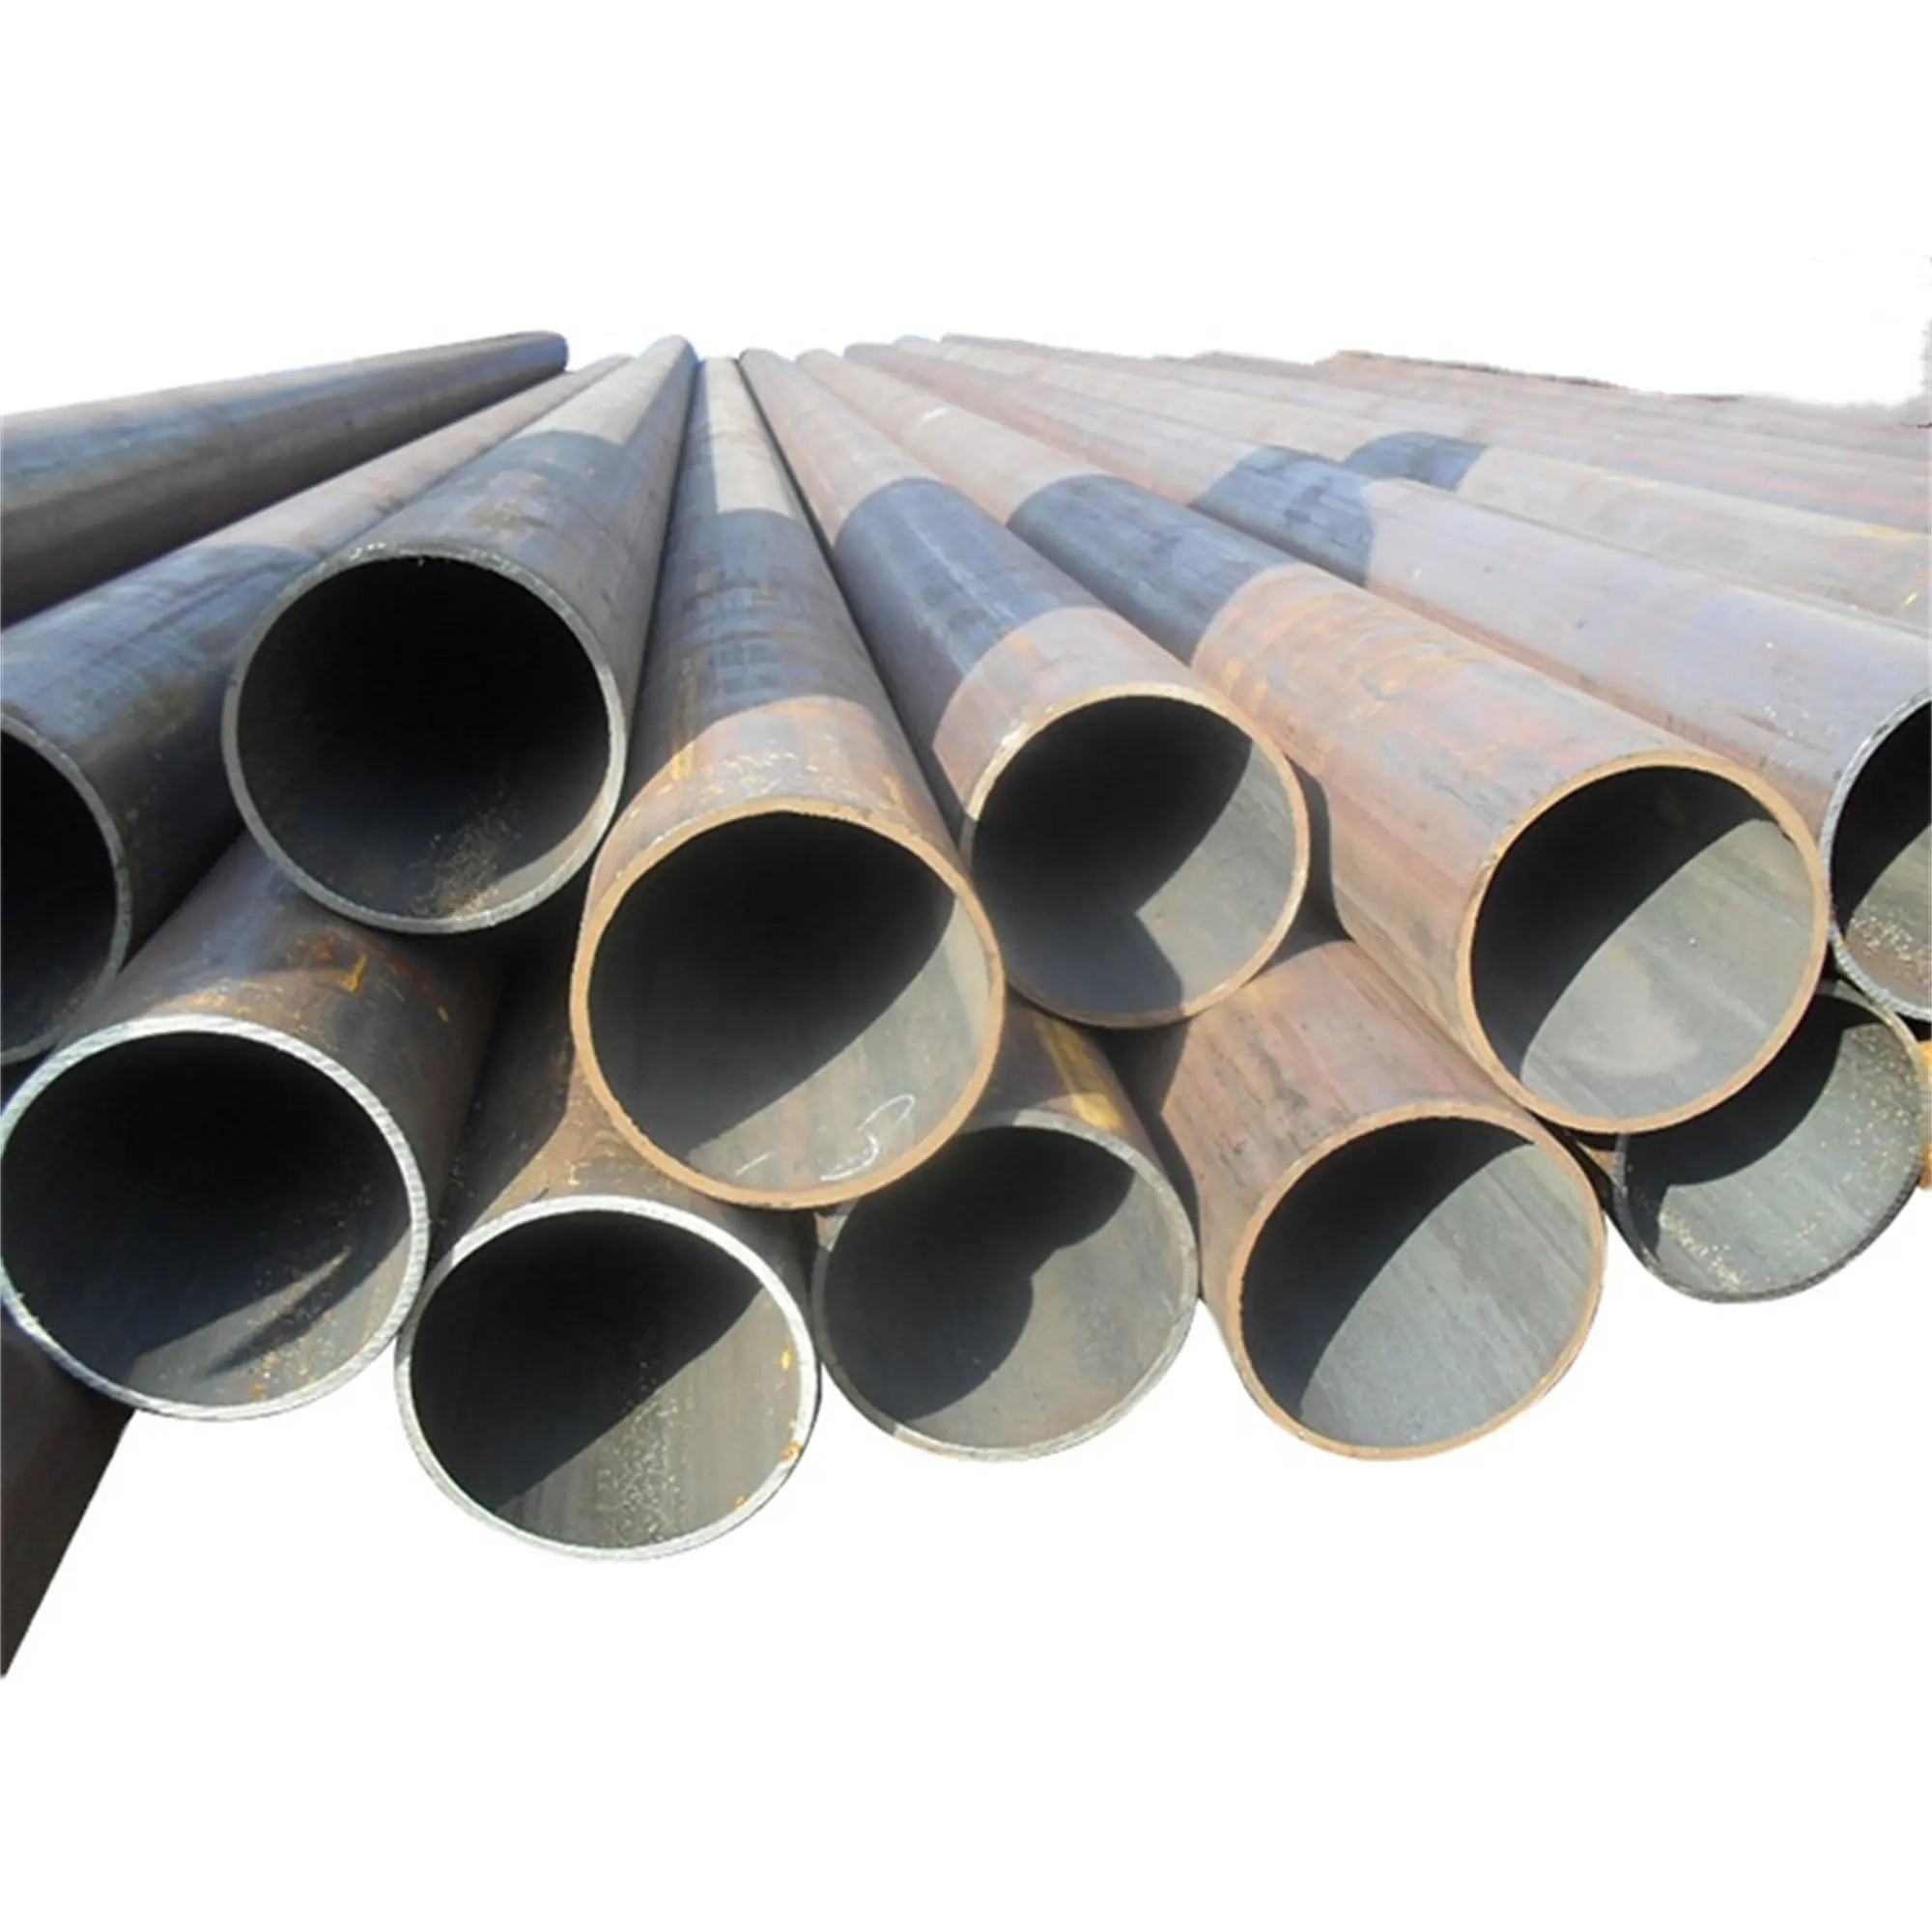 Inventory wholesale ASME SA/ASTM A333 Gr. 6 Carbon Steel Pipes on Low Temperature Application